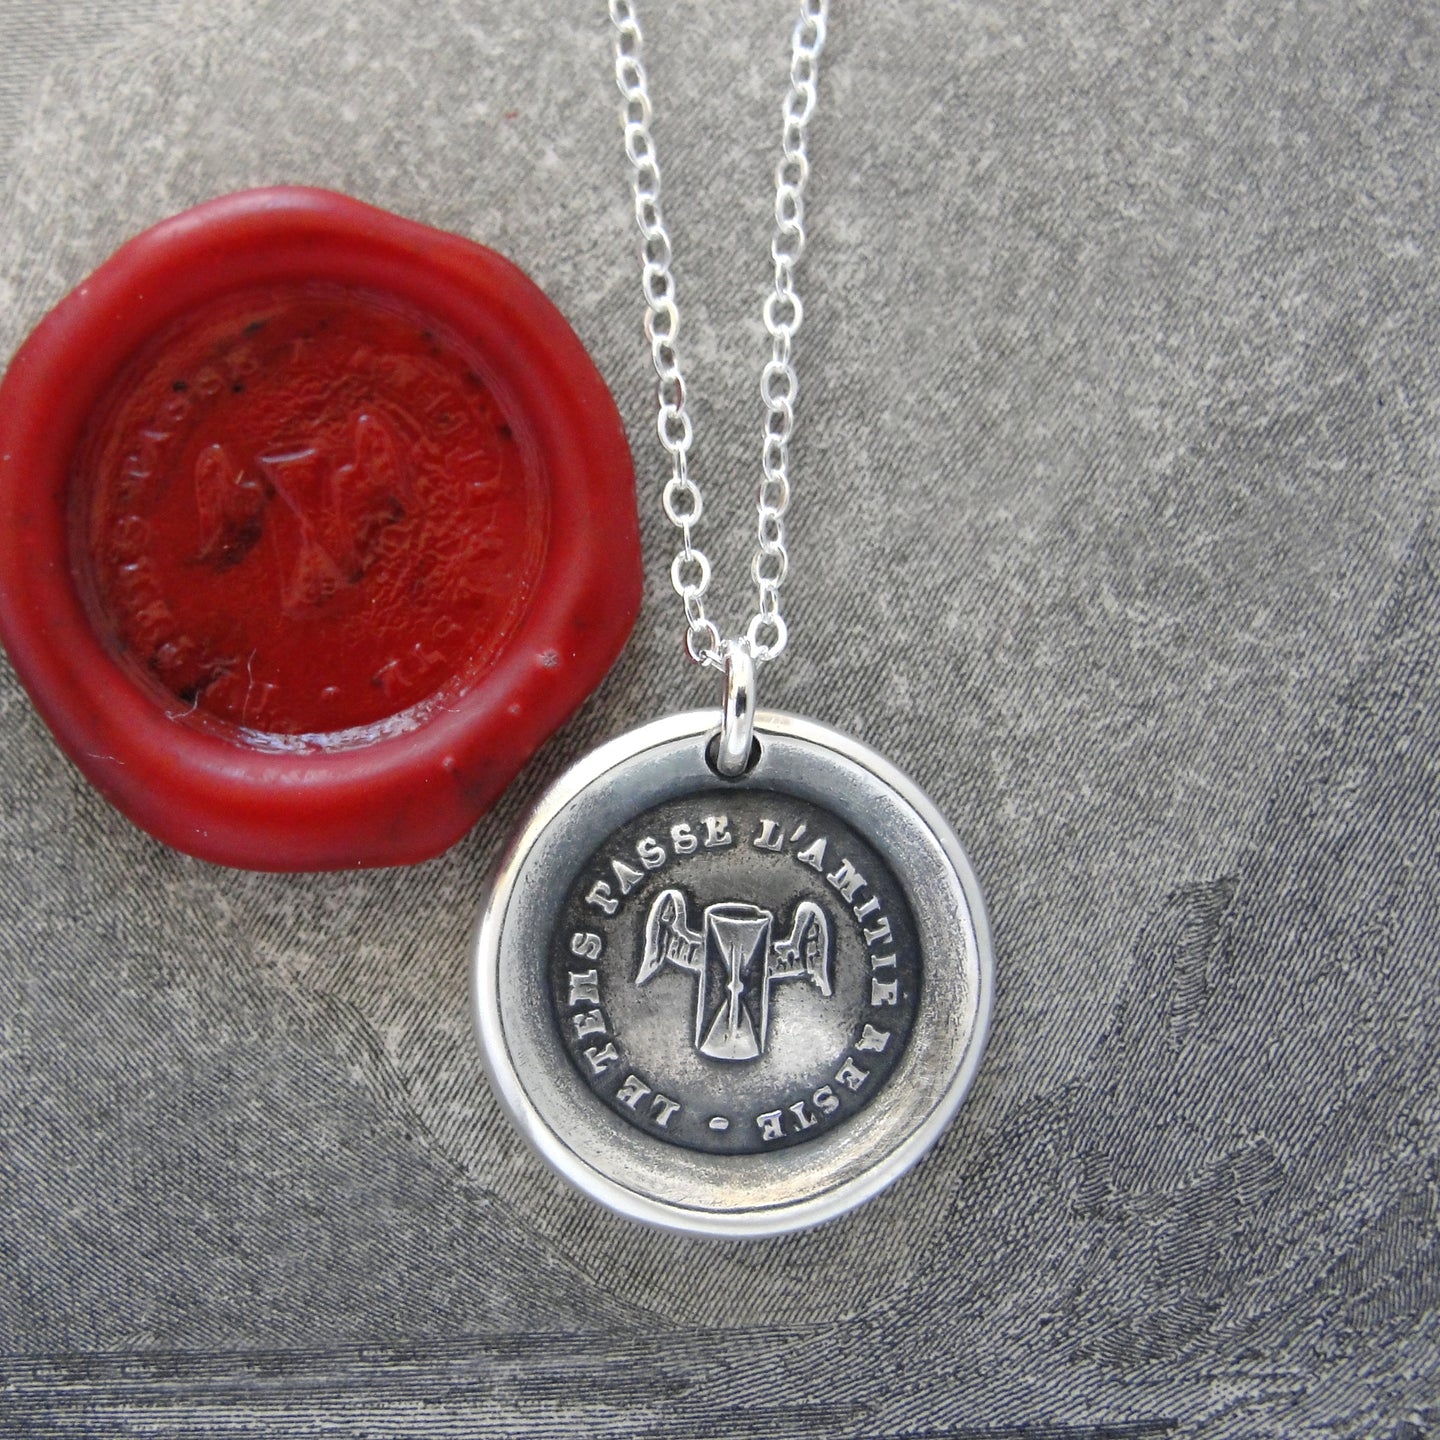 Silver Winged Hourglass Wax Seal Necklace - Time Passes But The Friendship Remains - RQP Studio